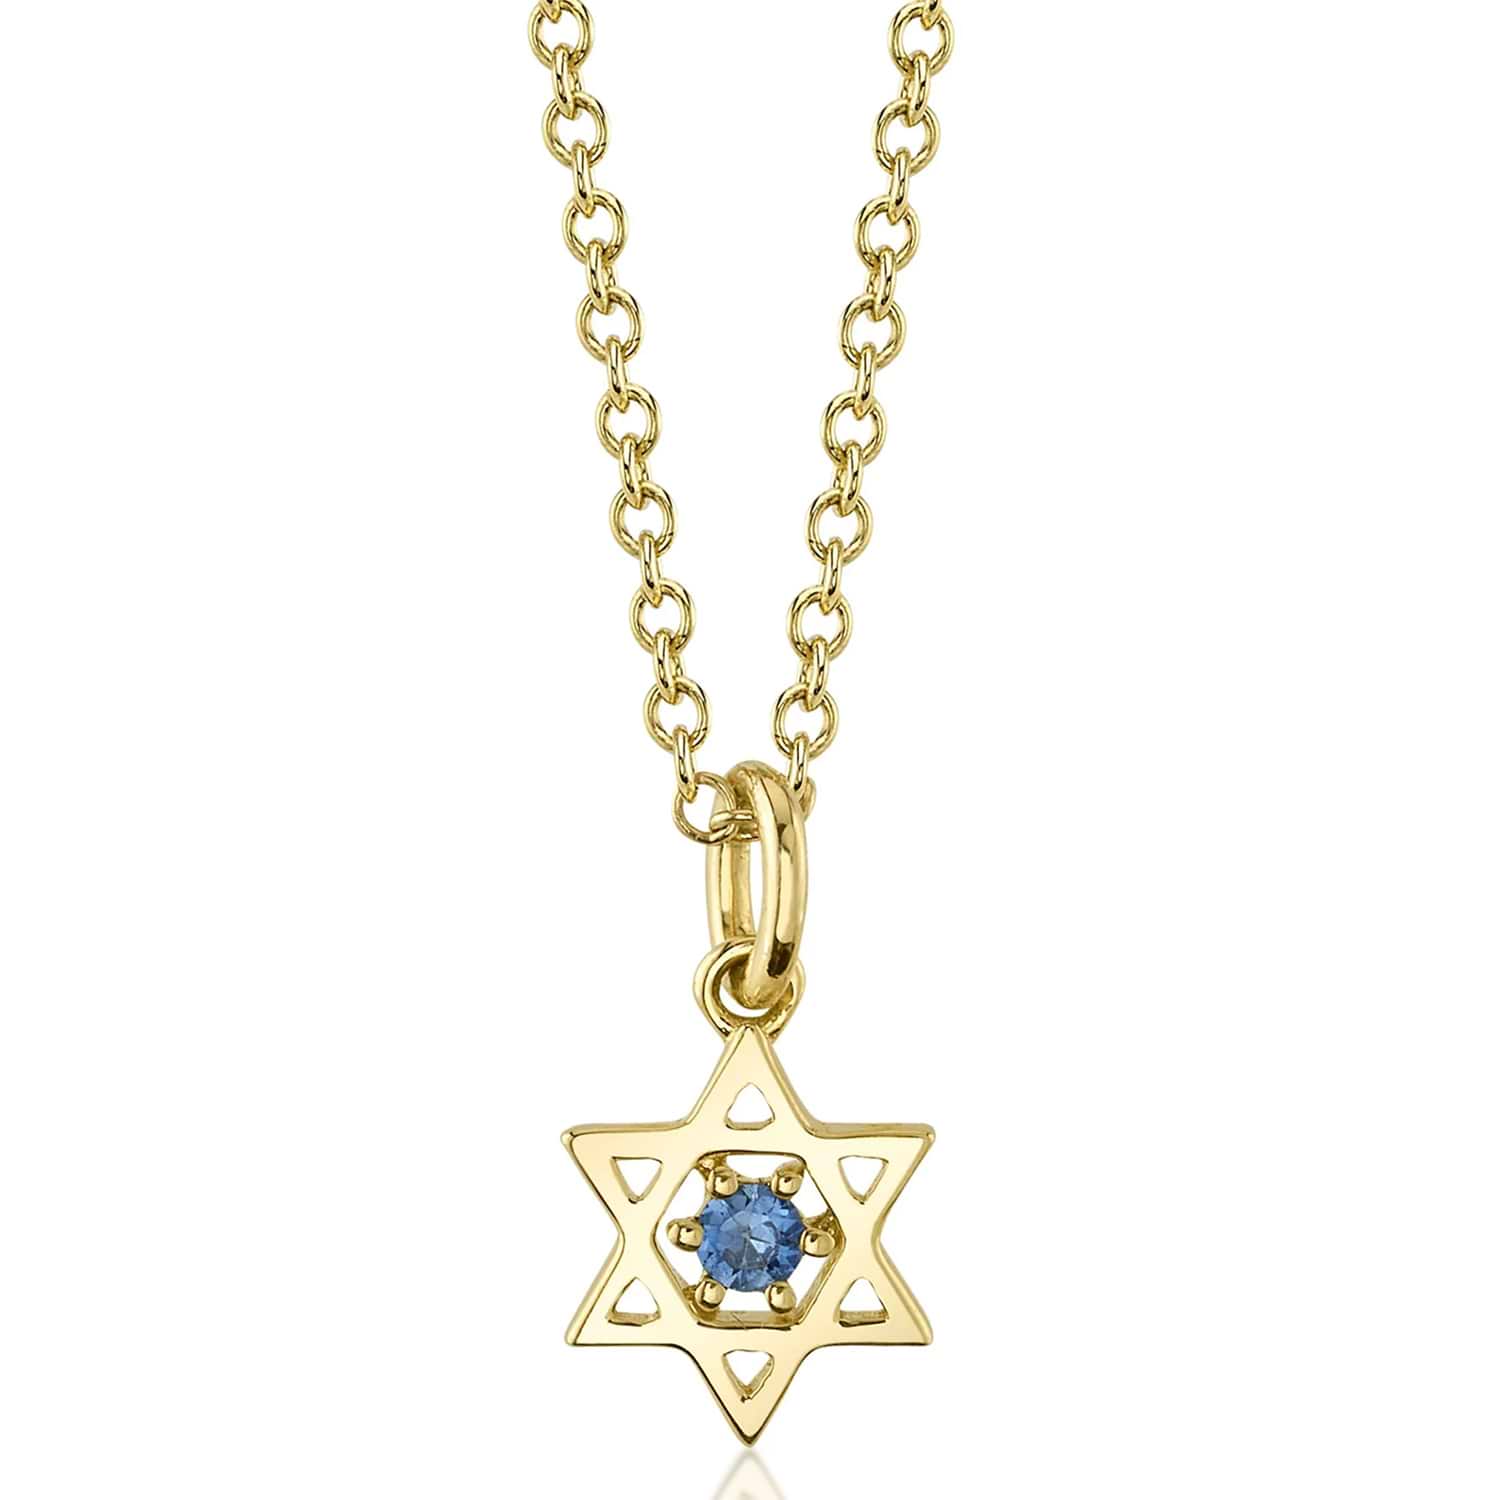 Blue Sapphire Star Of David Pendant Necklace 14K Yellow Gold (0.03ct)